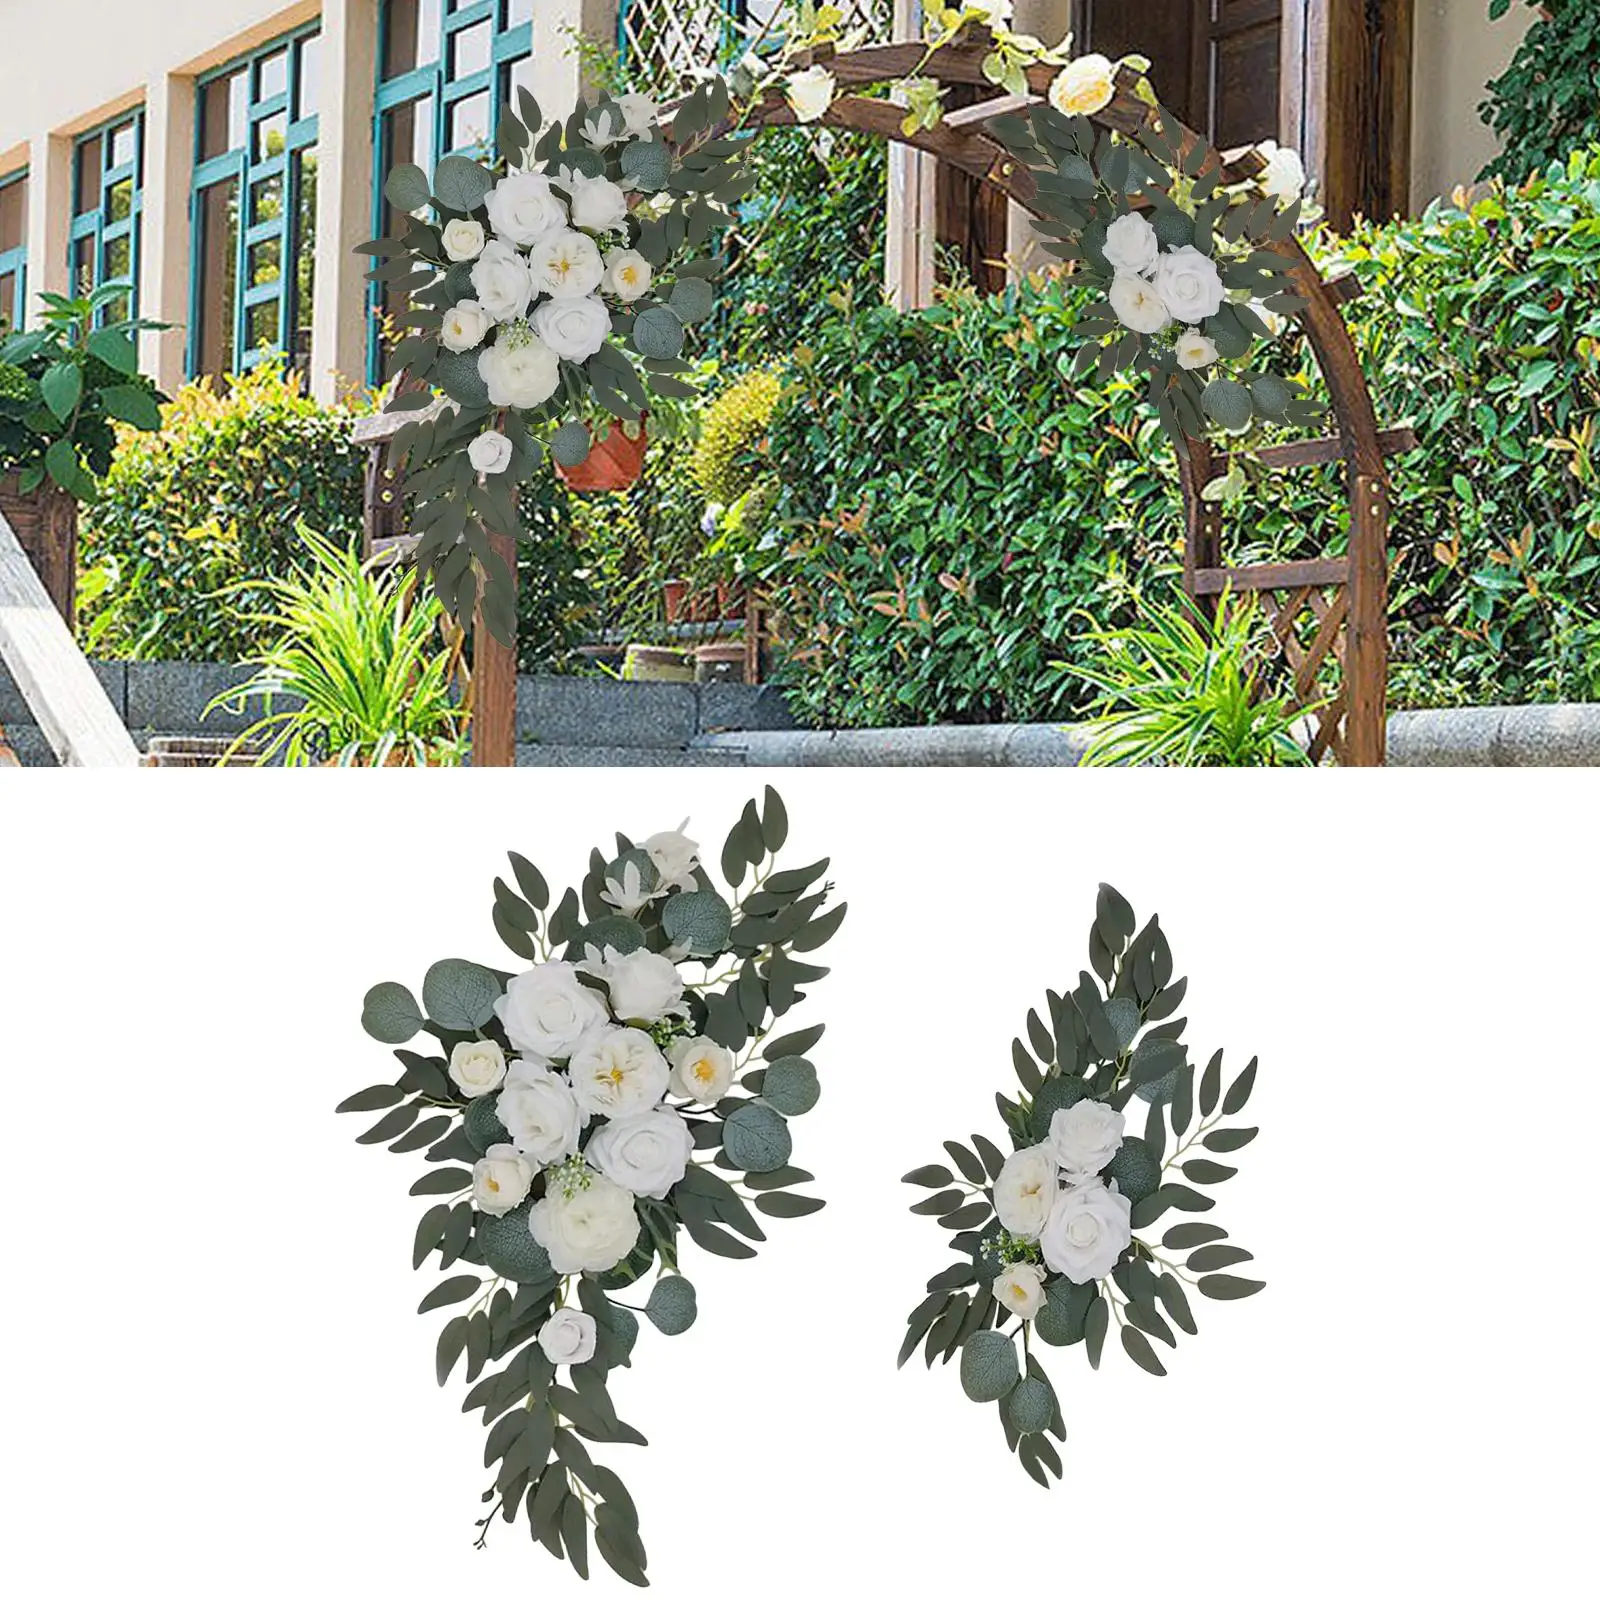 2x Wedding Arch Flowers Sunflowers Decor Rustic Flower Garland Display Fake Plant for Wall Lintel Reception Ceremony Home